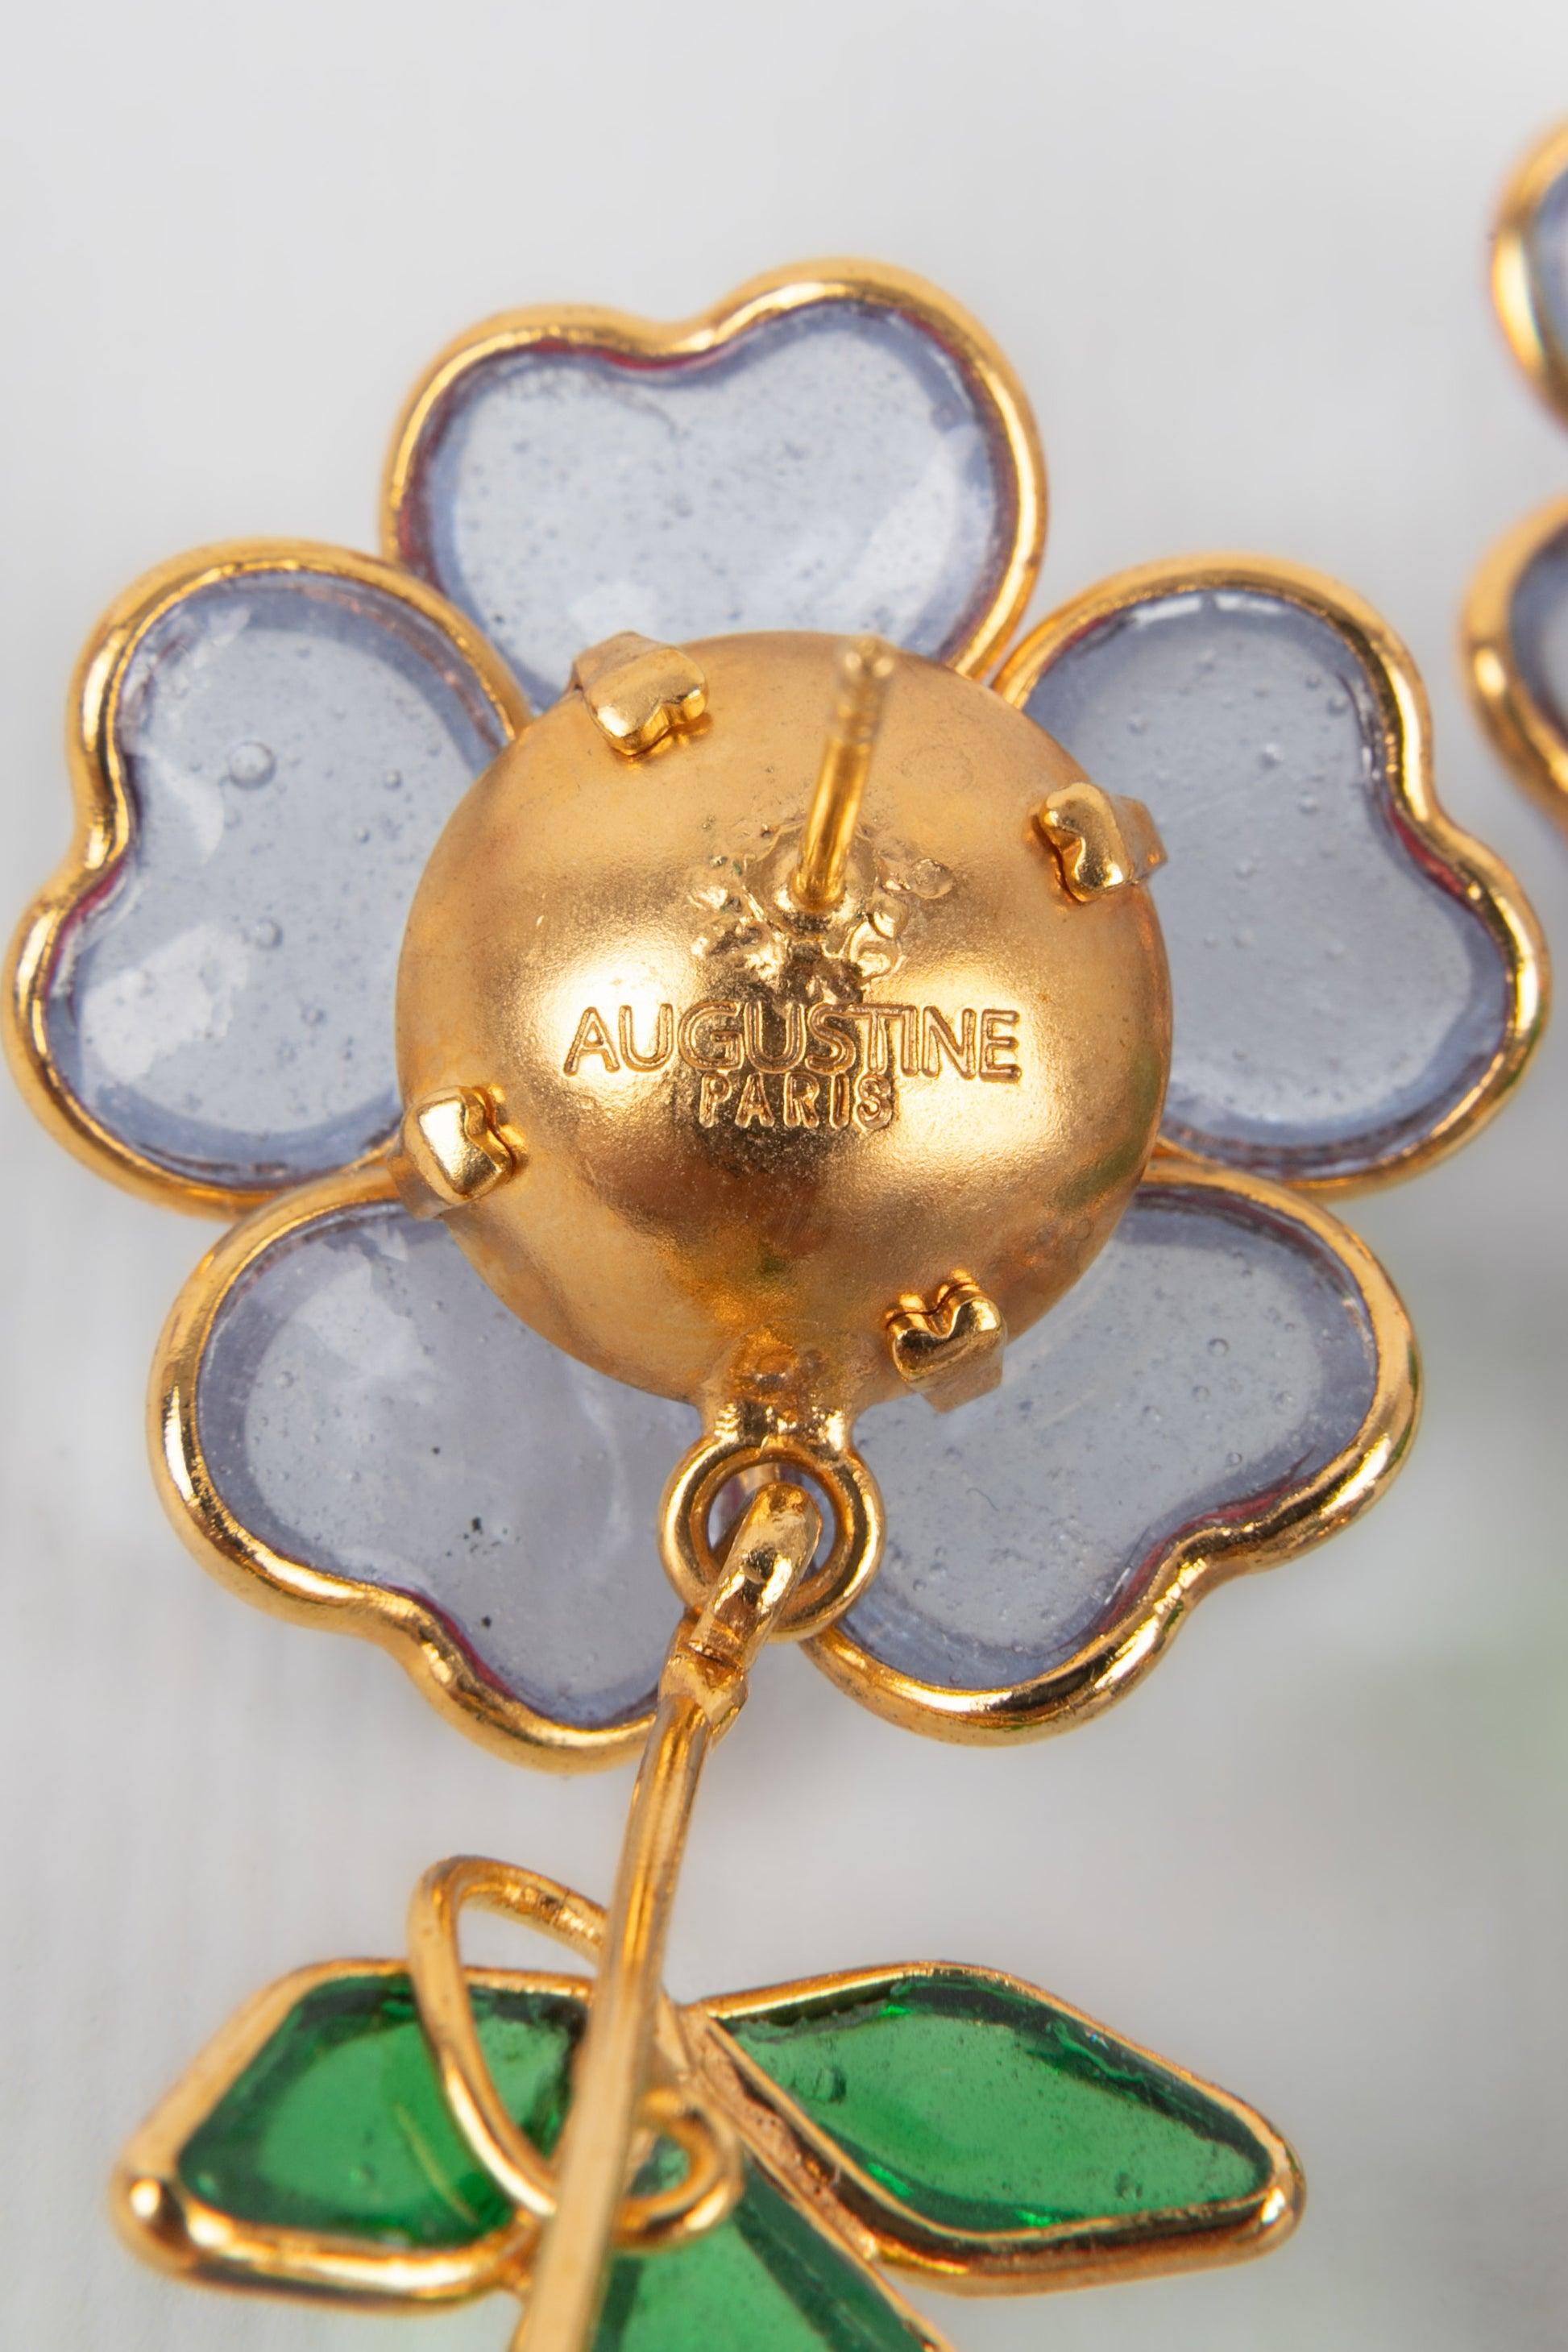 Augustine Golden Metal Earrings with Glass Paste in Blue Tones For Sale 2